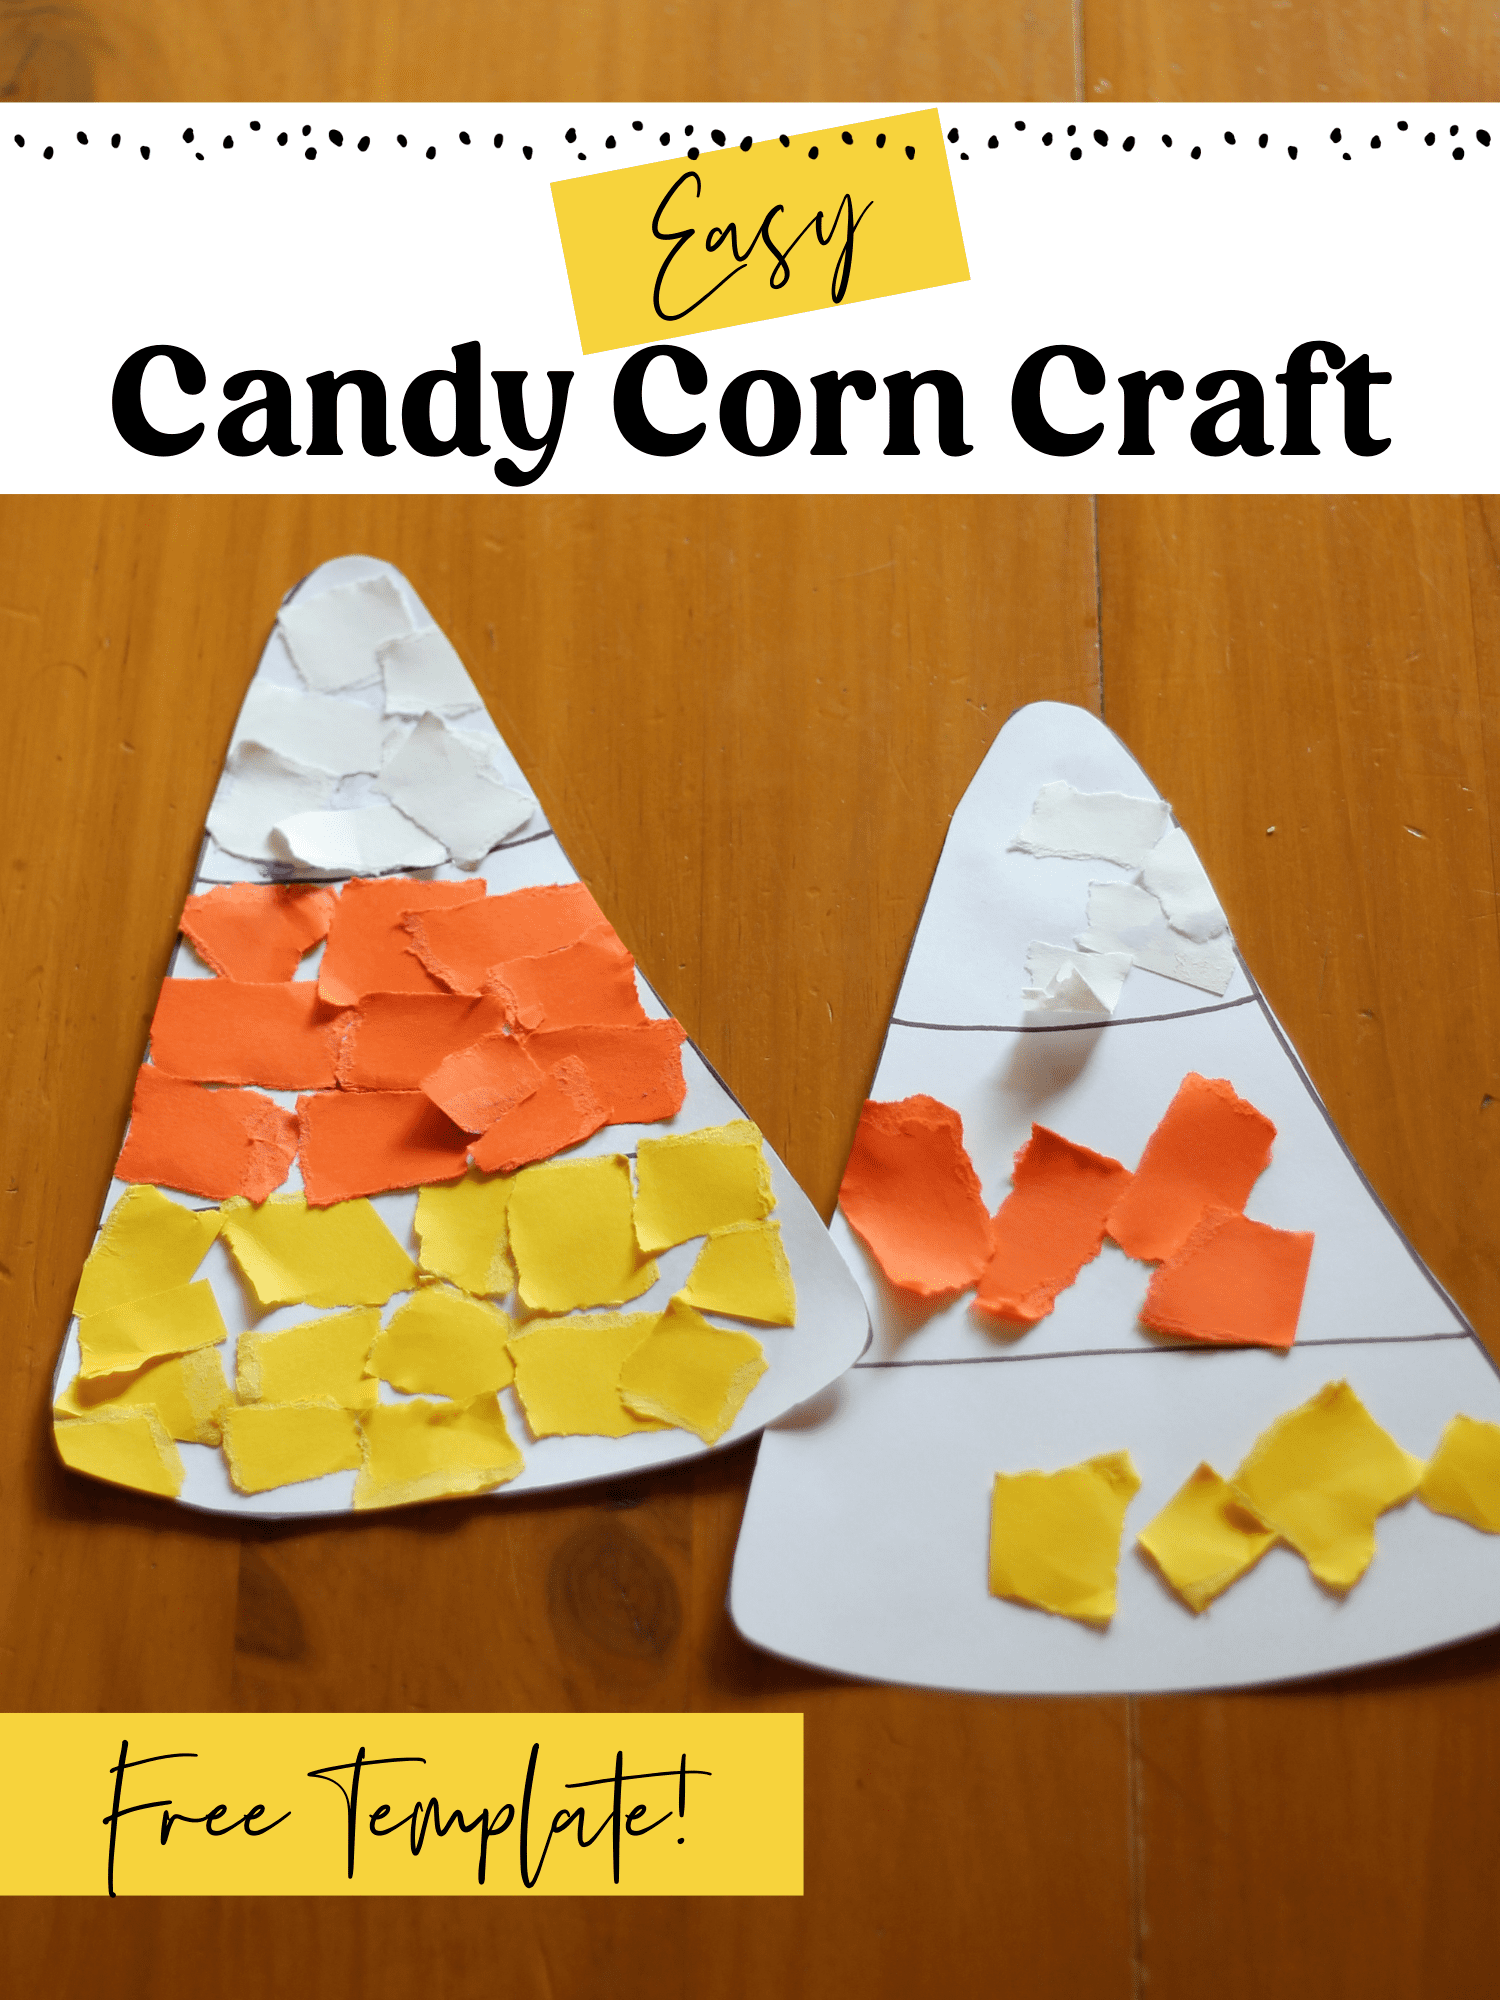 Cpmpleted candy corn crafts laying on a table.